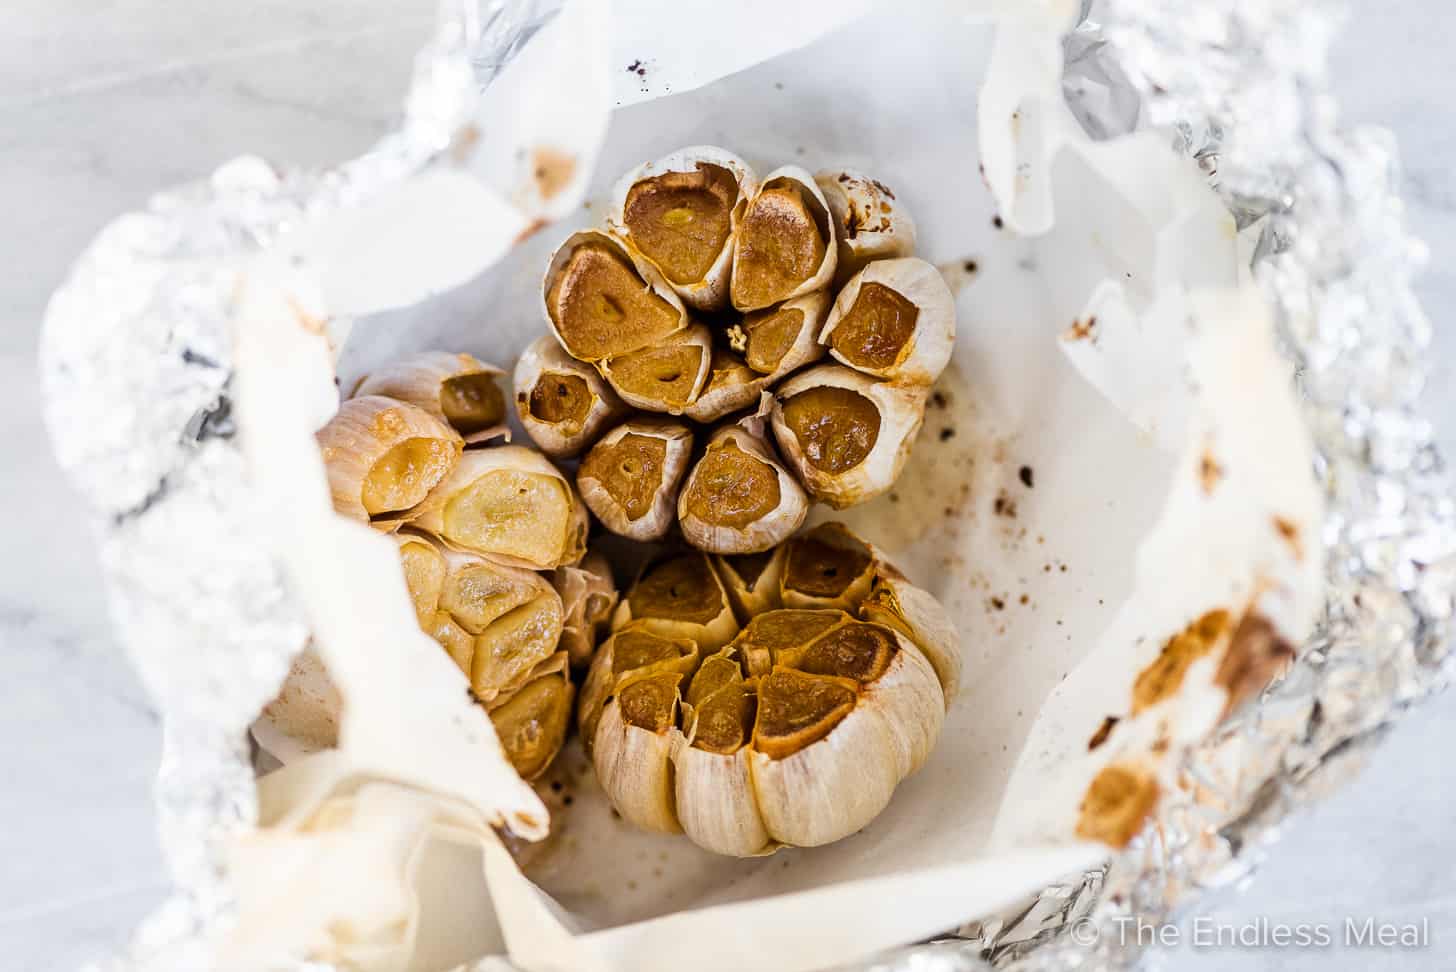 Roasted garlic in a foil package.